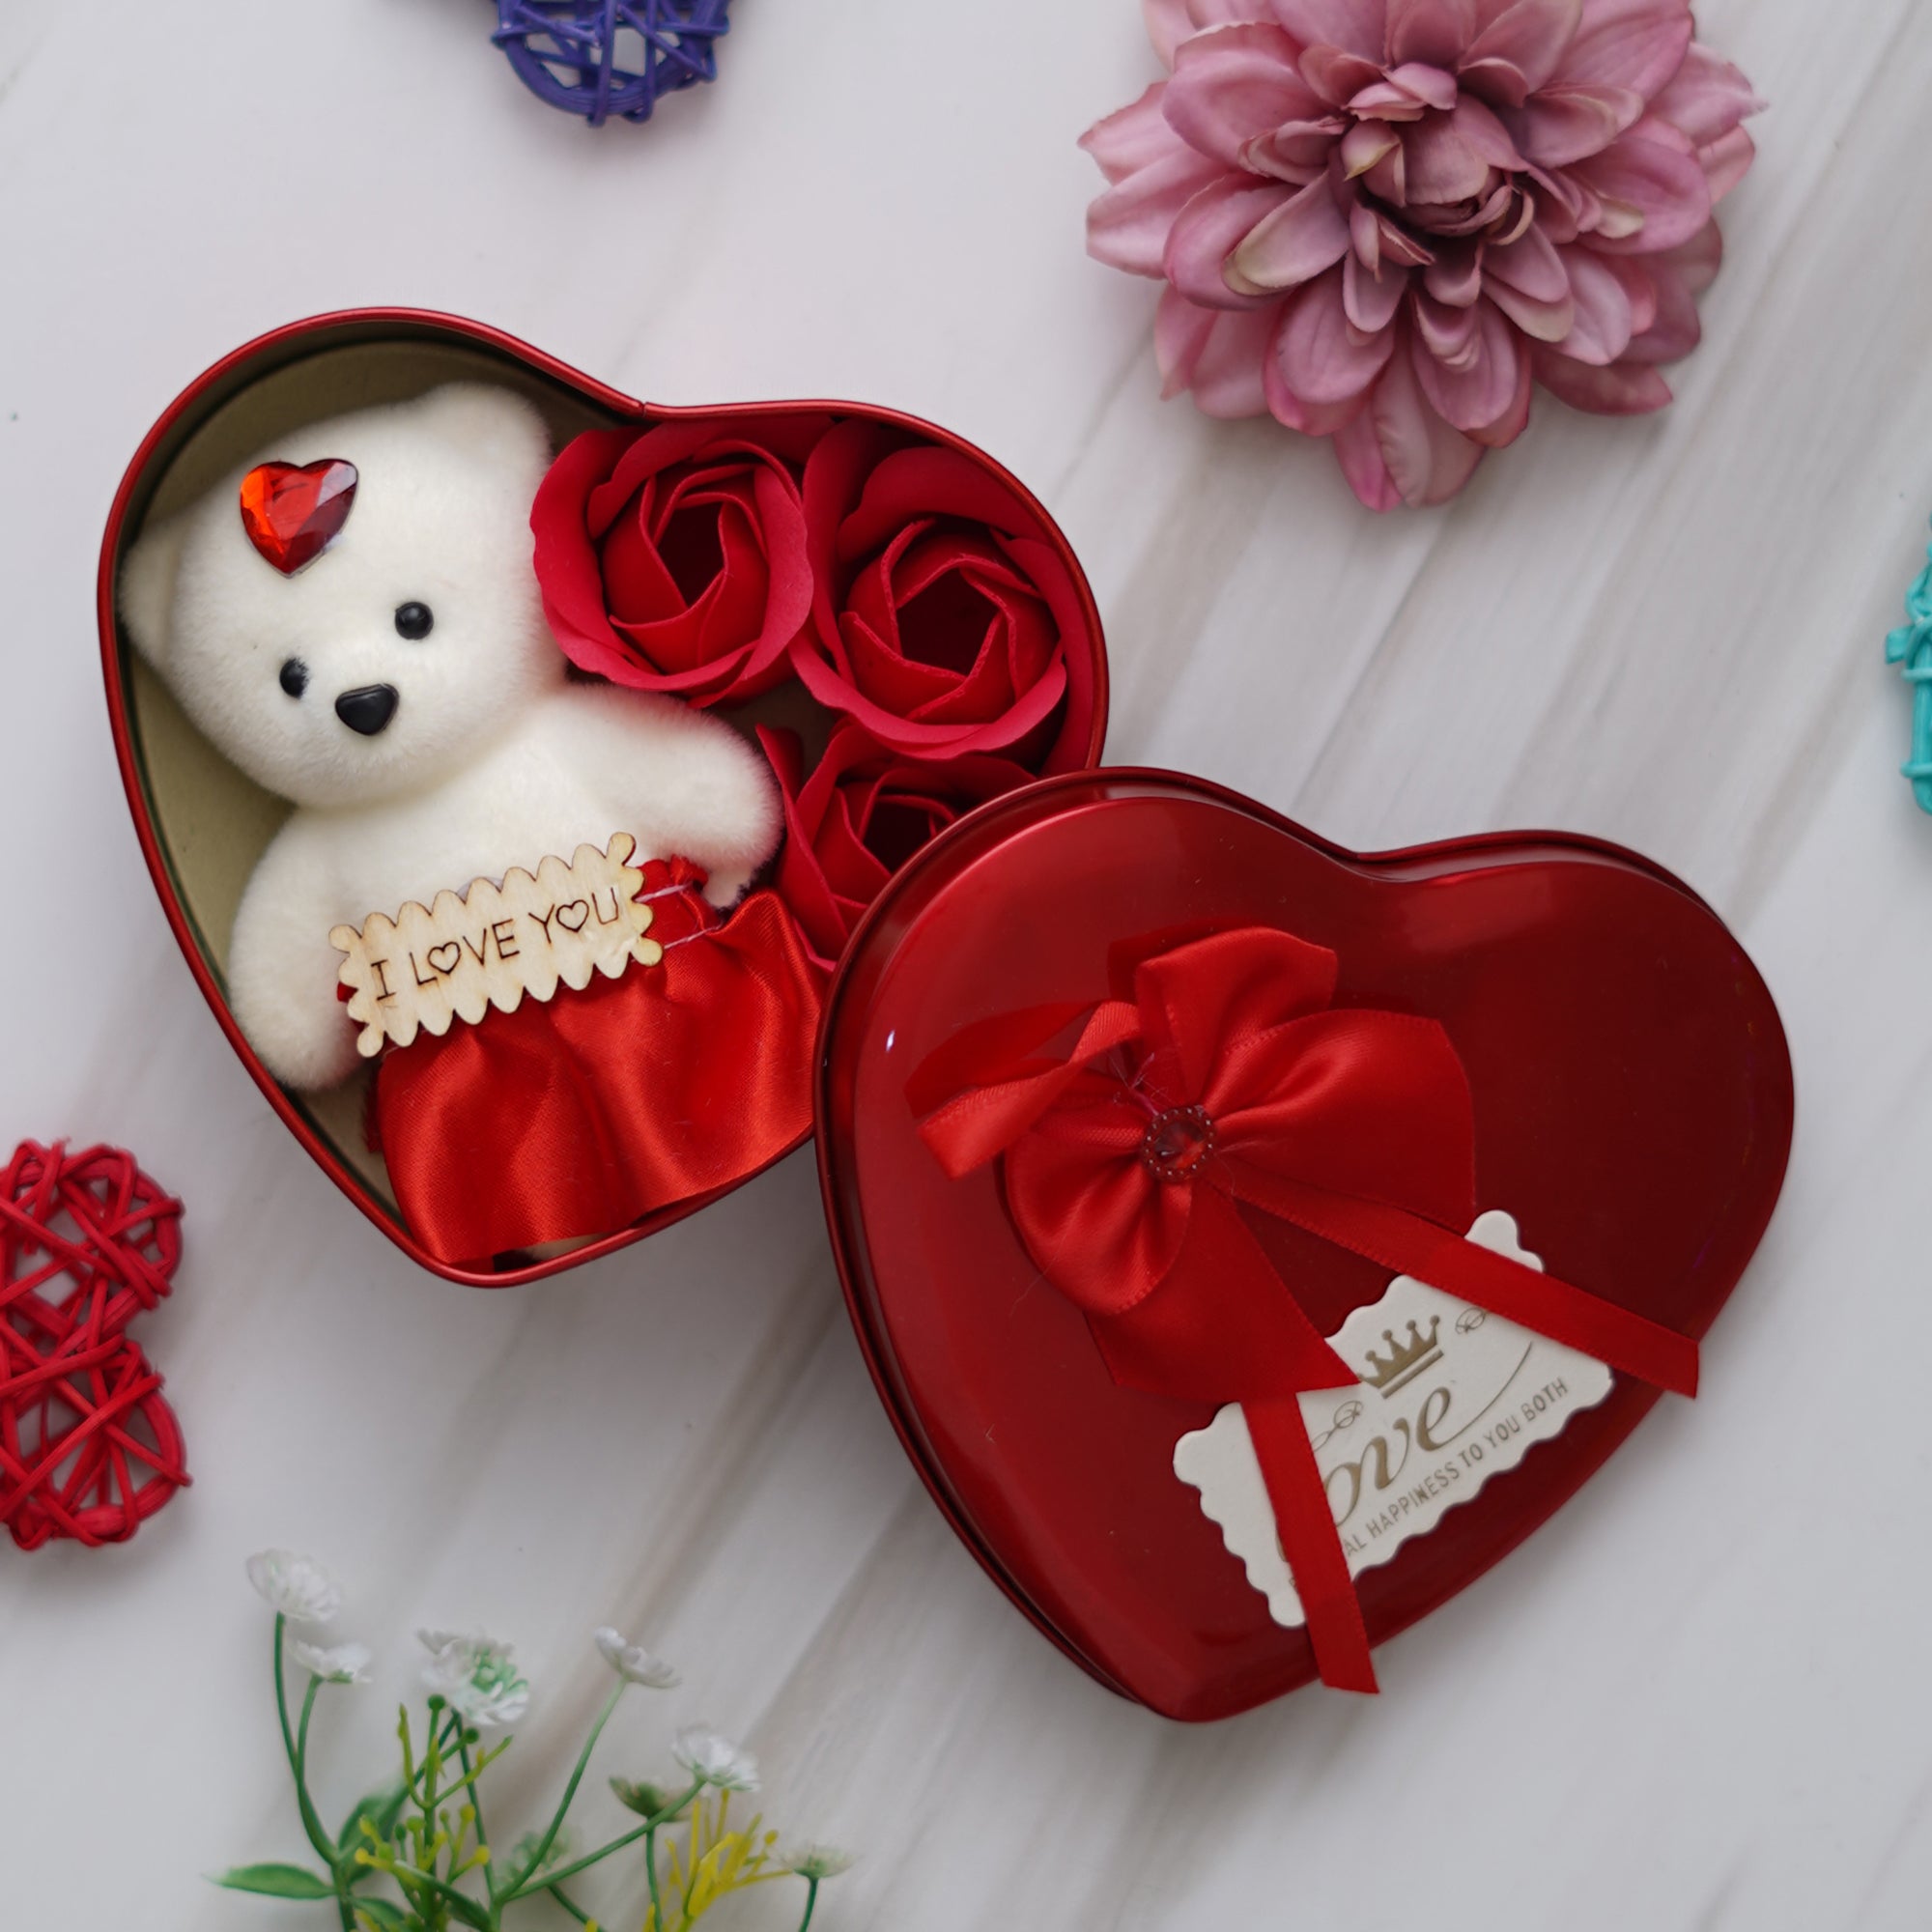 Valentine Combo of Card, Heart Shaped Gift Box Set with White Teddy and Red Roses, Red and White Heart Hugging Each Other Gift Set 3